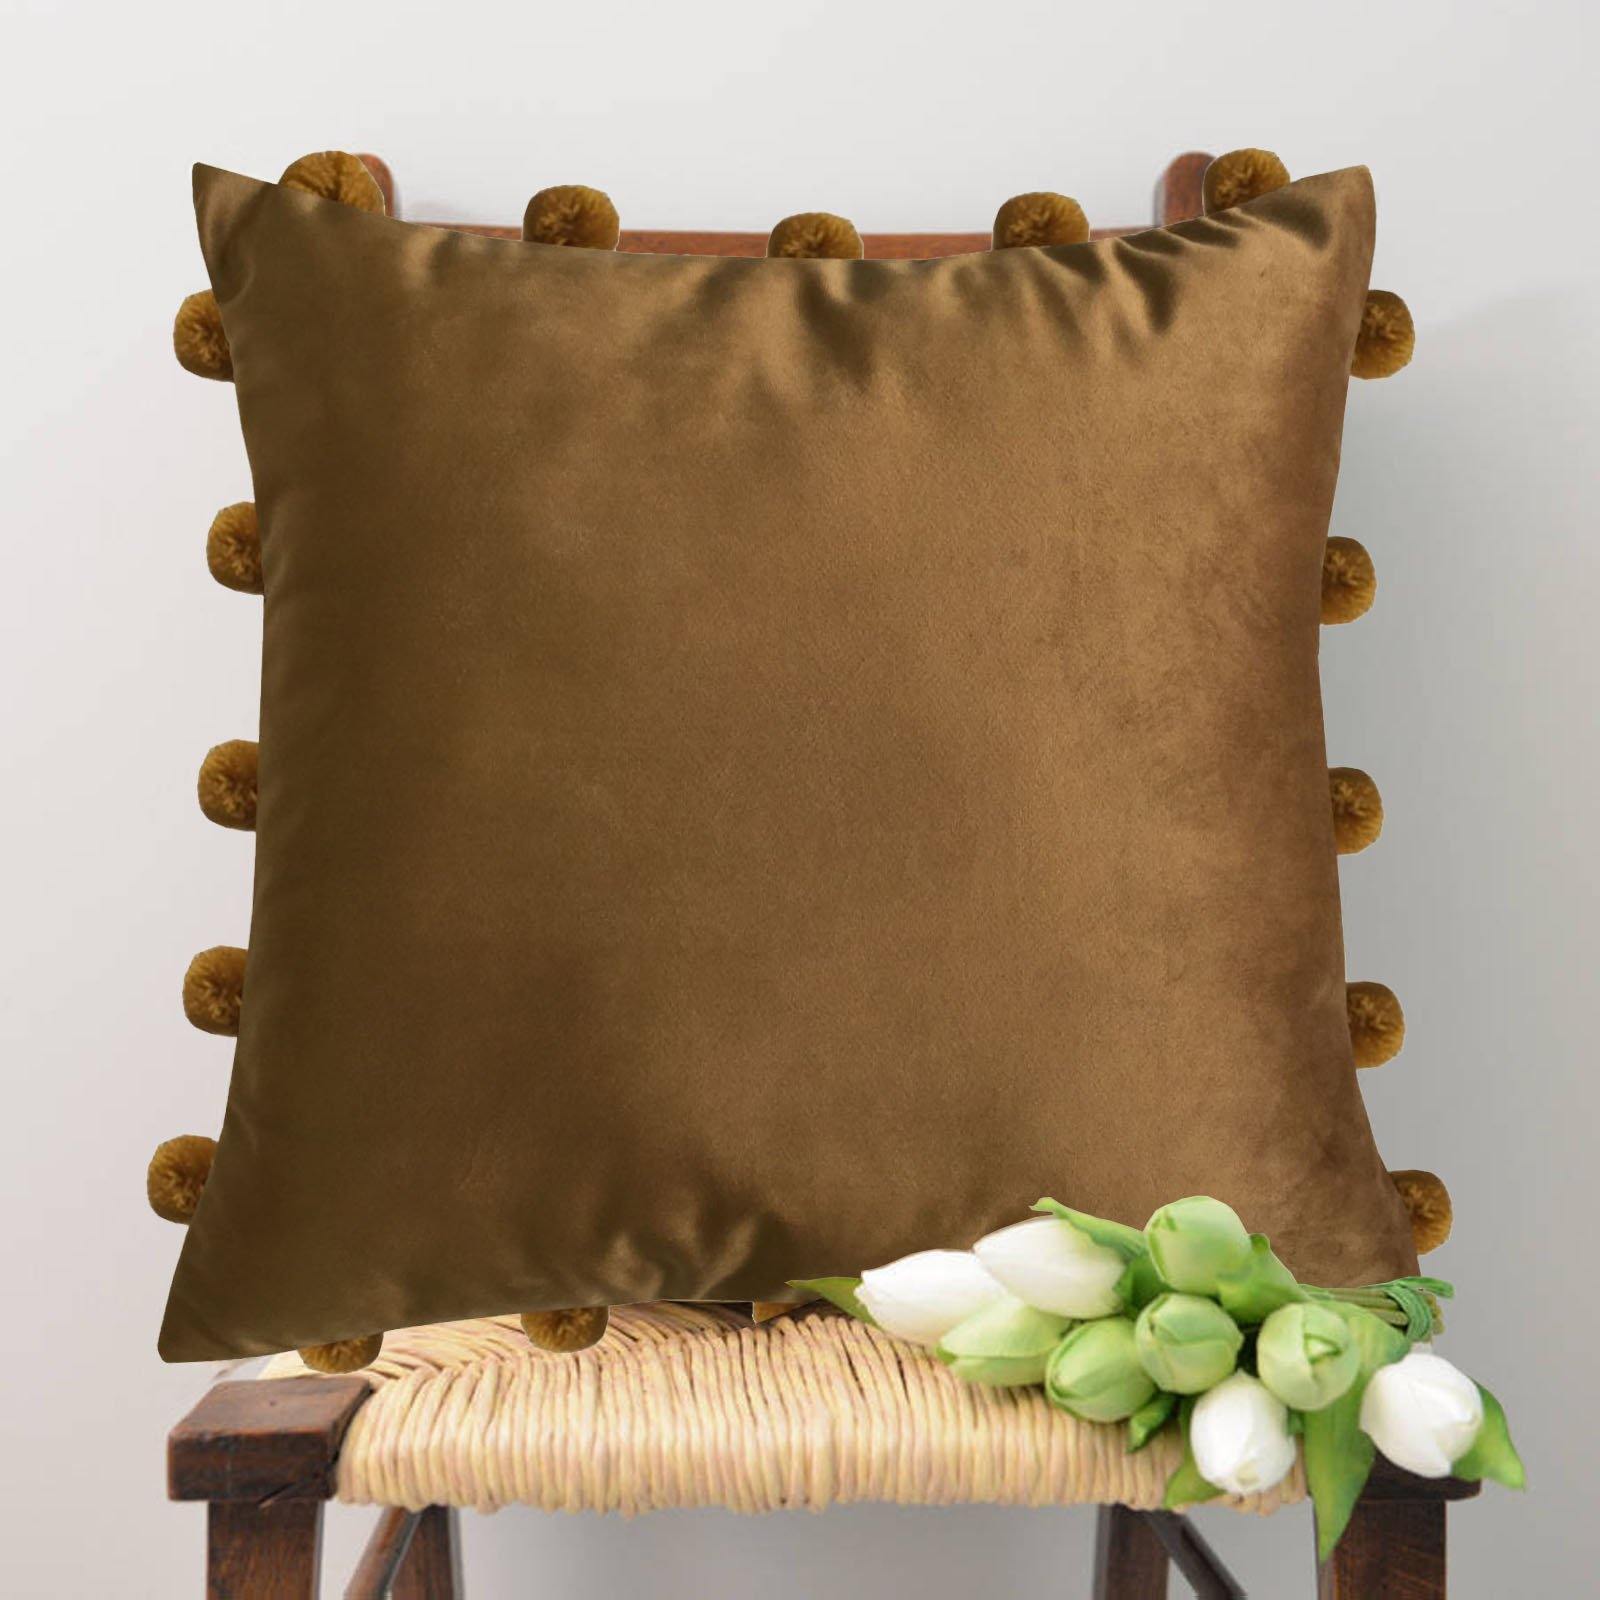 Lushomes Smooth Tan Velvet Cushion Covers with matching vibrant Pom Poms (Single Pc, 16‰۝ x 16‰۝) - Lushomes